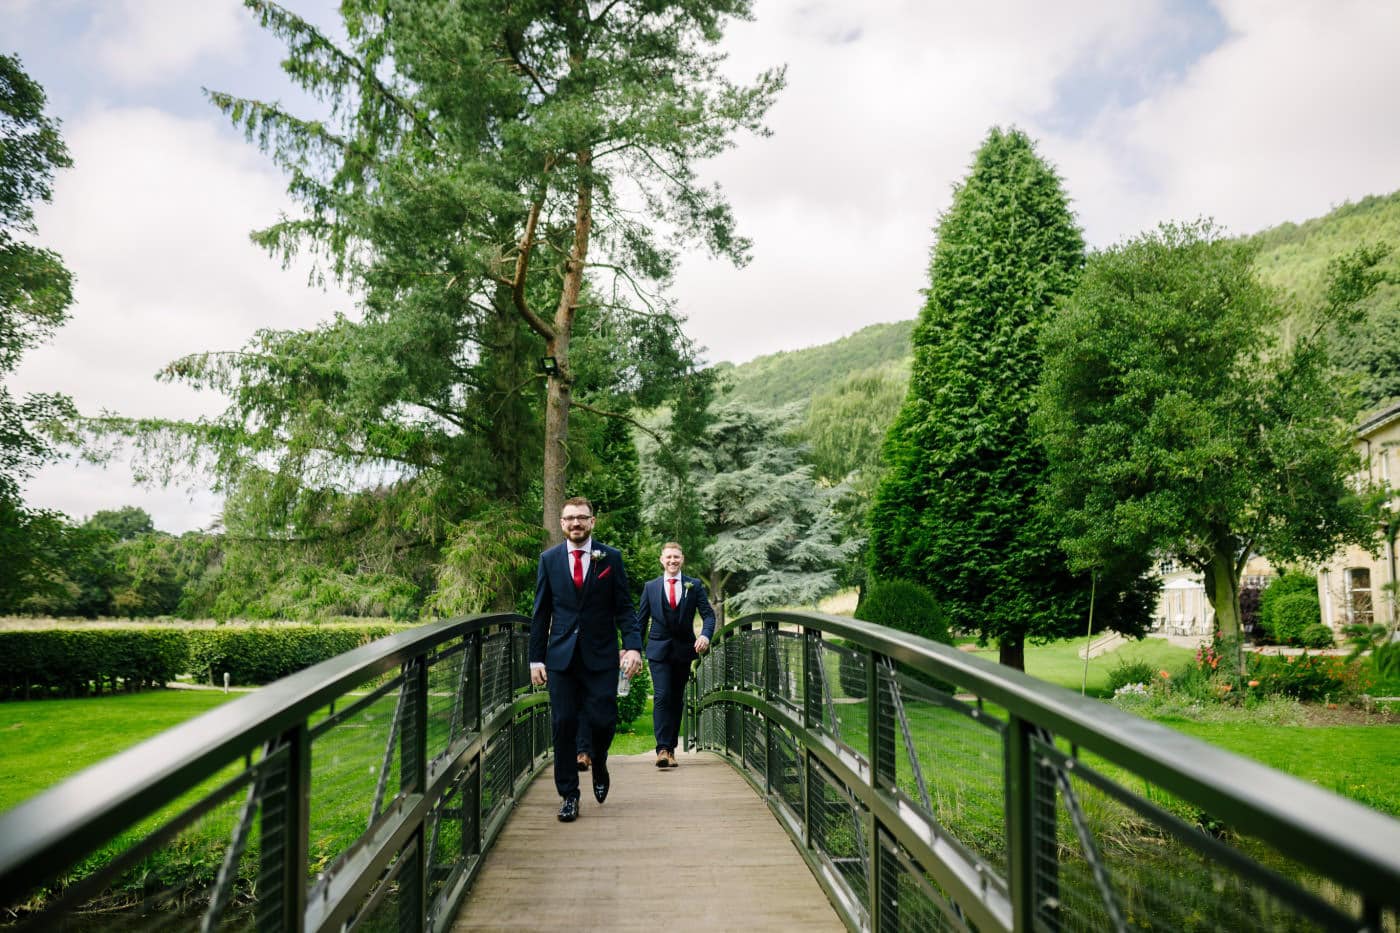 Outdoor ceremony locations make this venue one of the hidden gems in north yorkshire